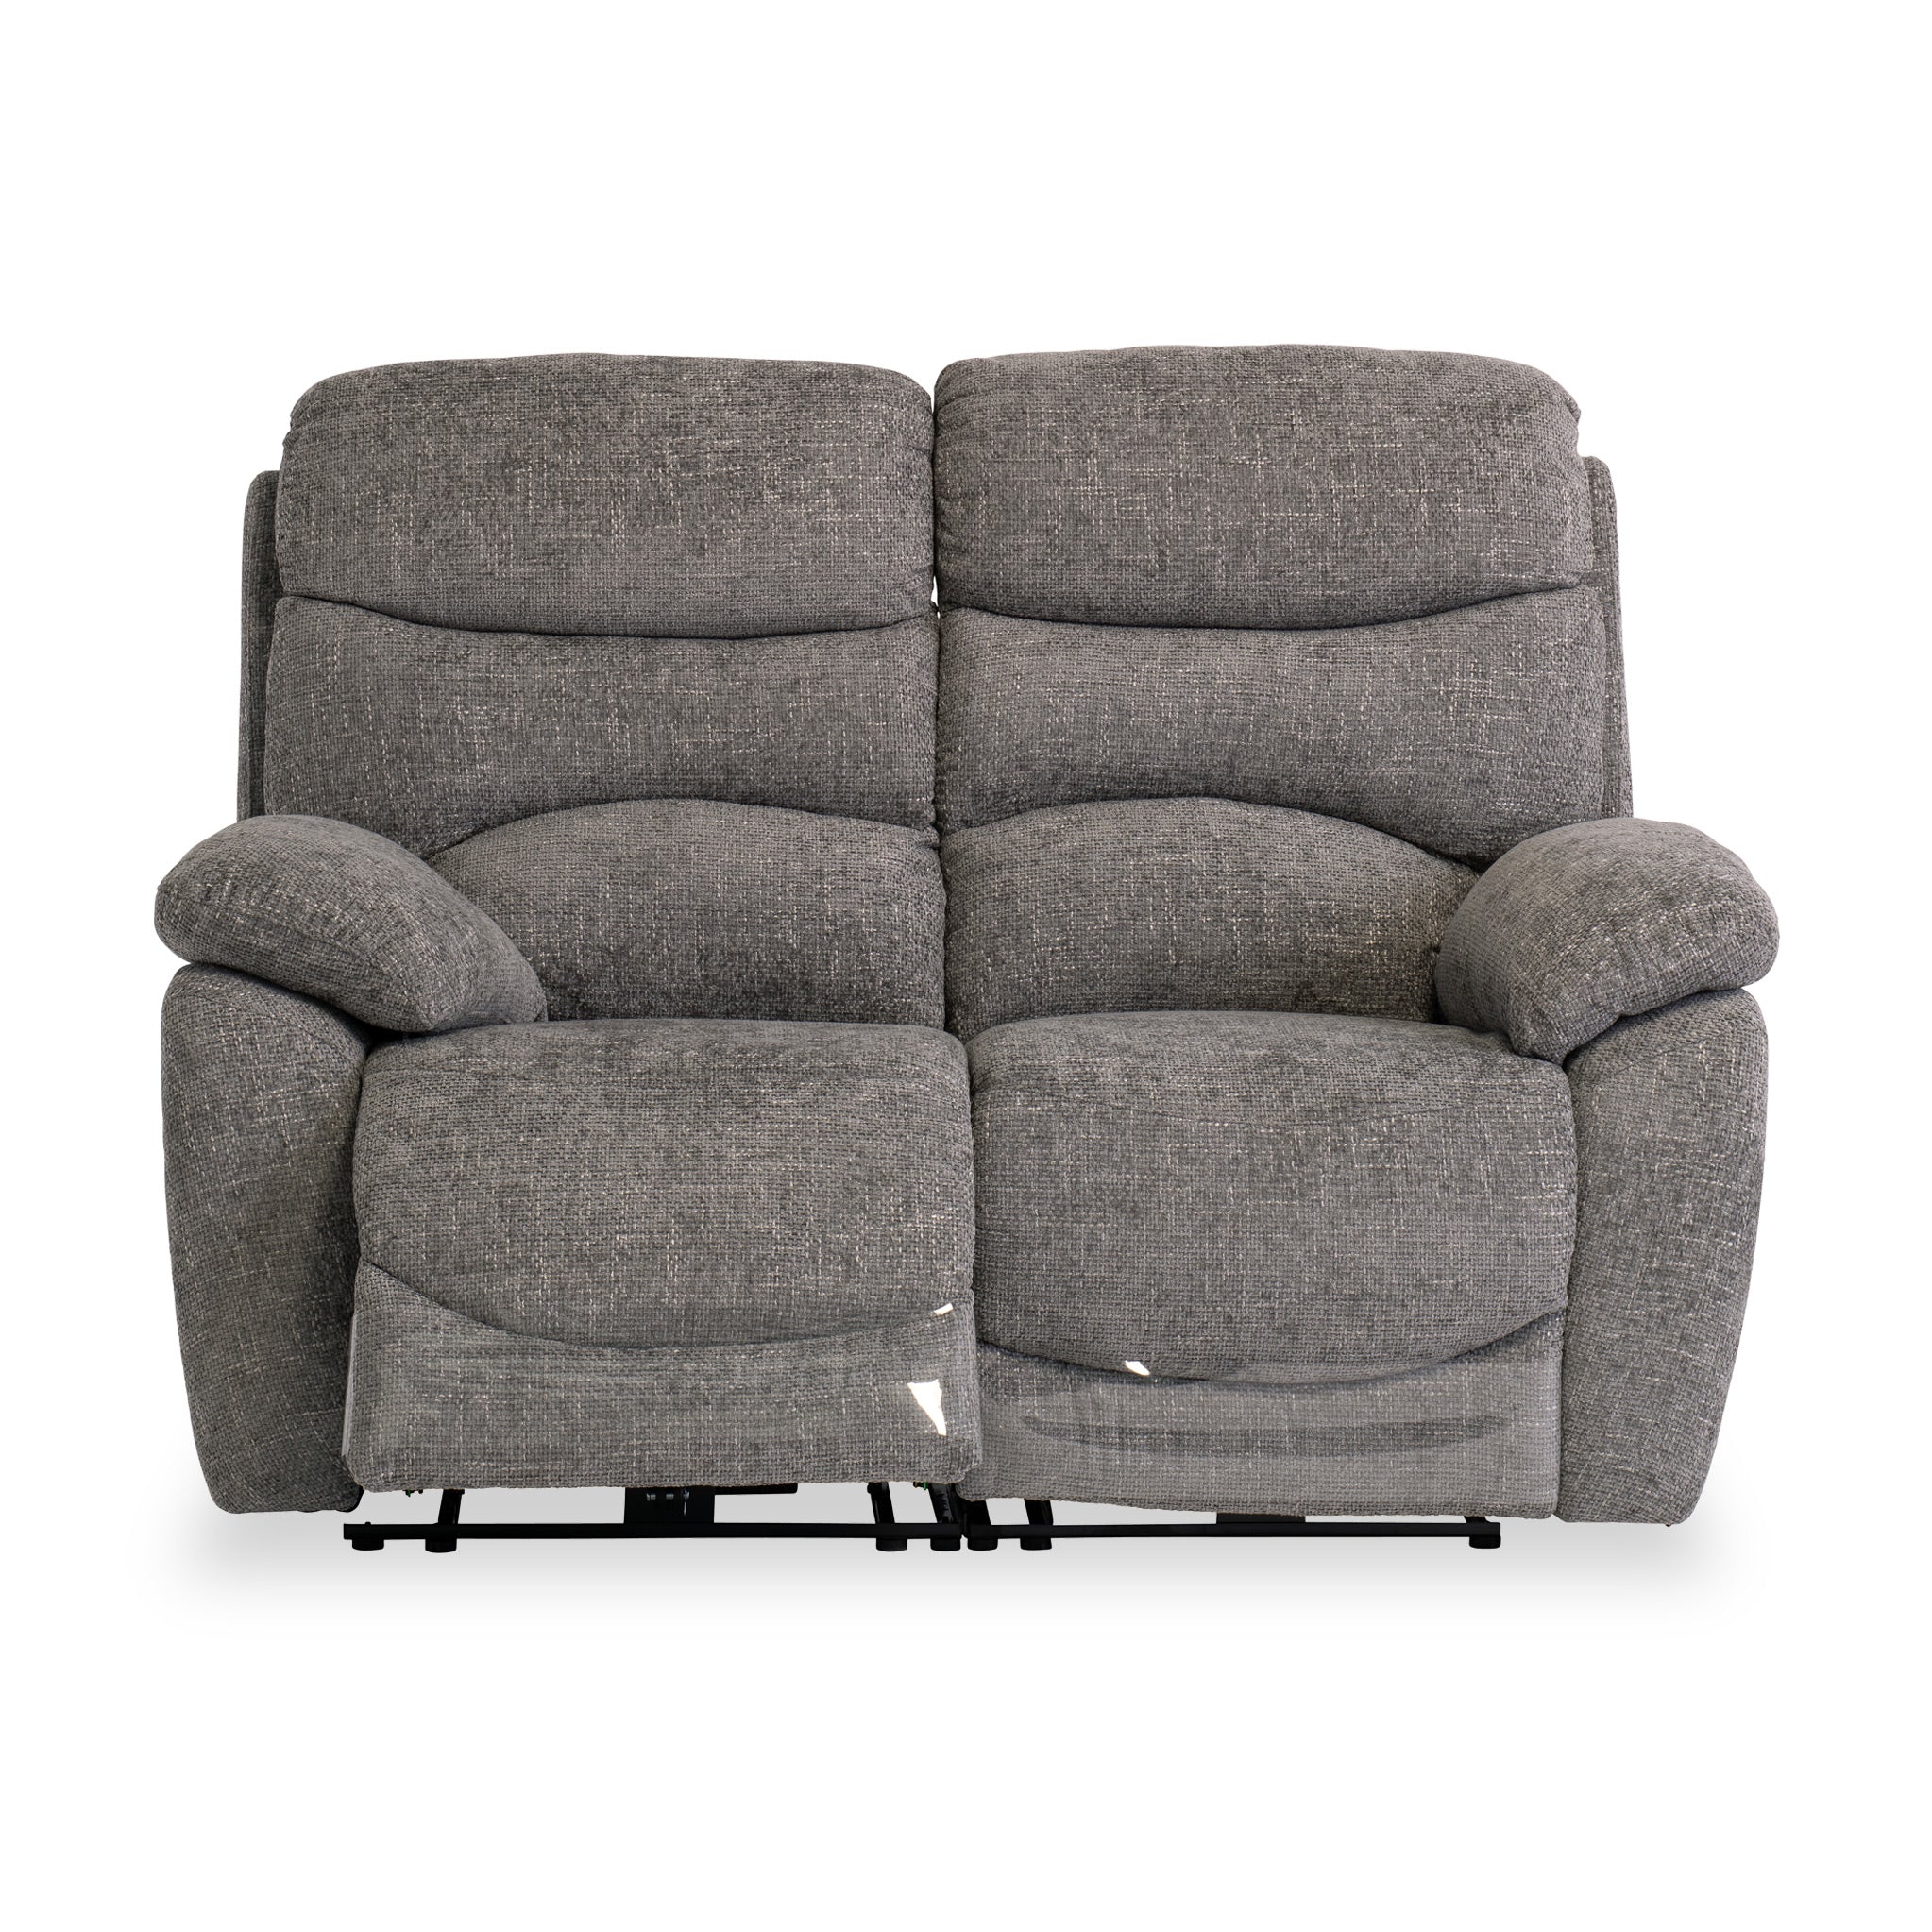 Seville Fabric Electric Reclining 2 Seater Sofa Beige Grey Roseland